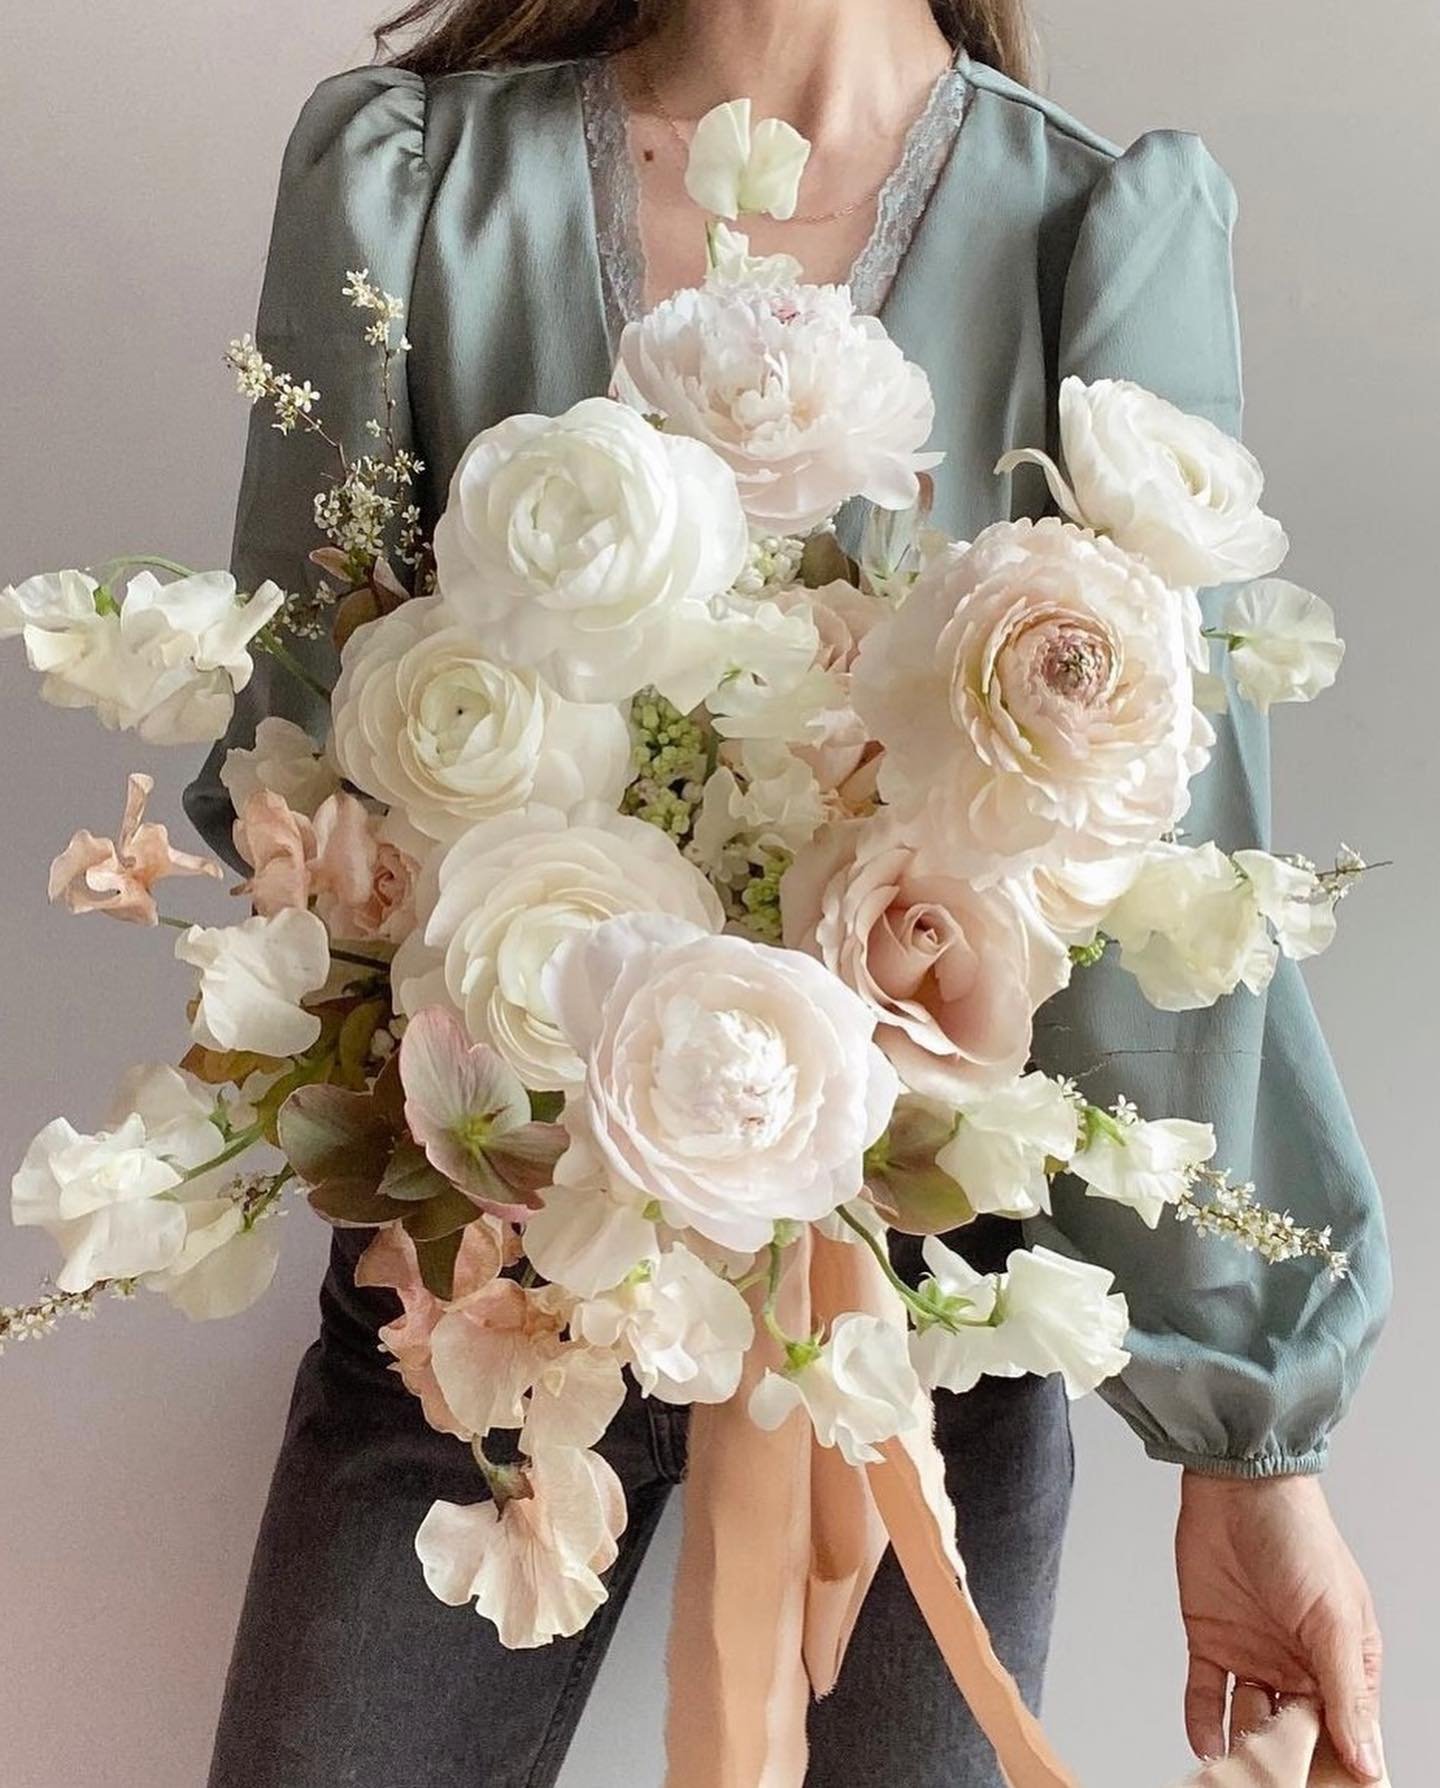 wedding dresses that feel like spring &amp; blooms by @winsome_floral 🌸&hearts;

1. &lsquo;cosmos&rsquo; @alenaleenabridal 
2. &lsquo;breeze&rsquo; willowby @watters 
3. &lsquo;jasmine&rsquo; @alenaleenabridal 
4. &lsquo;simone&rsquo; @truvellebrida